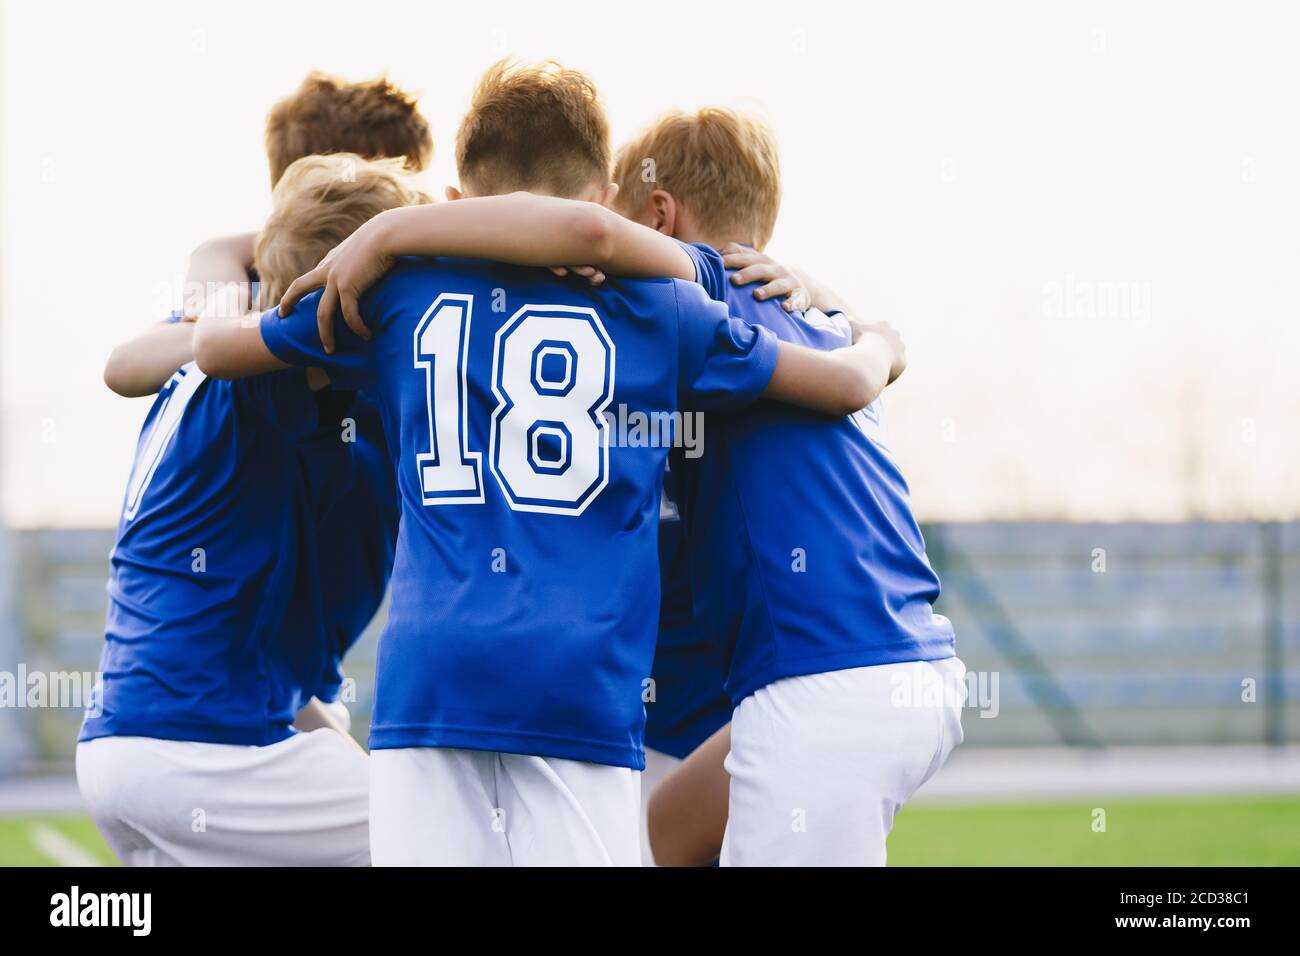 Children Play Sports in a Team. Boys Huddling Before the Game. Kids Sports Team United Ready to Play Match. School Age Boys in Blue Sports Uniforms Stock Photo